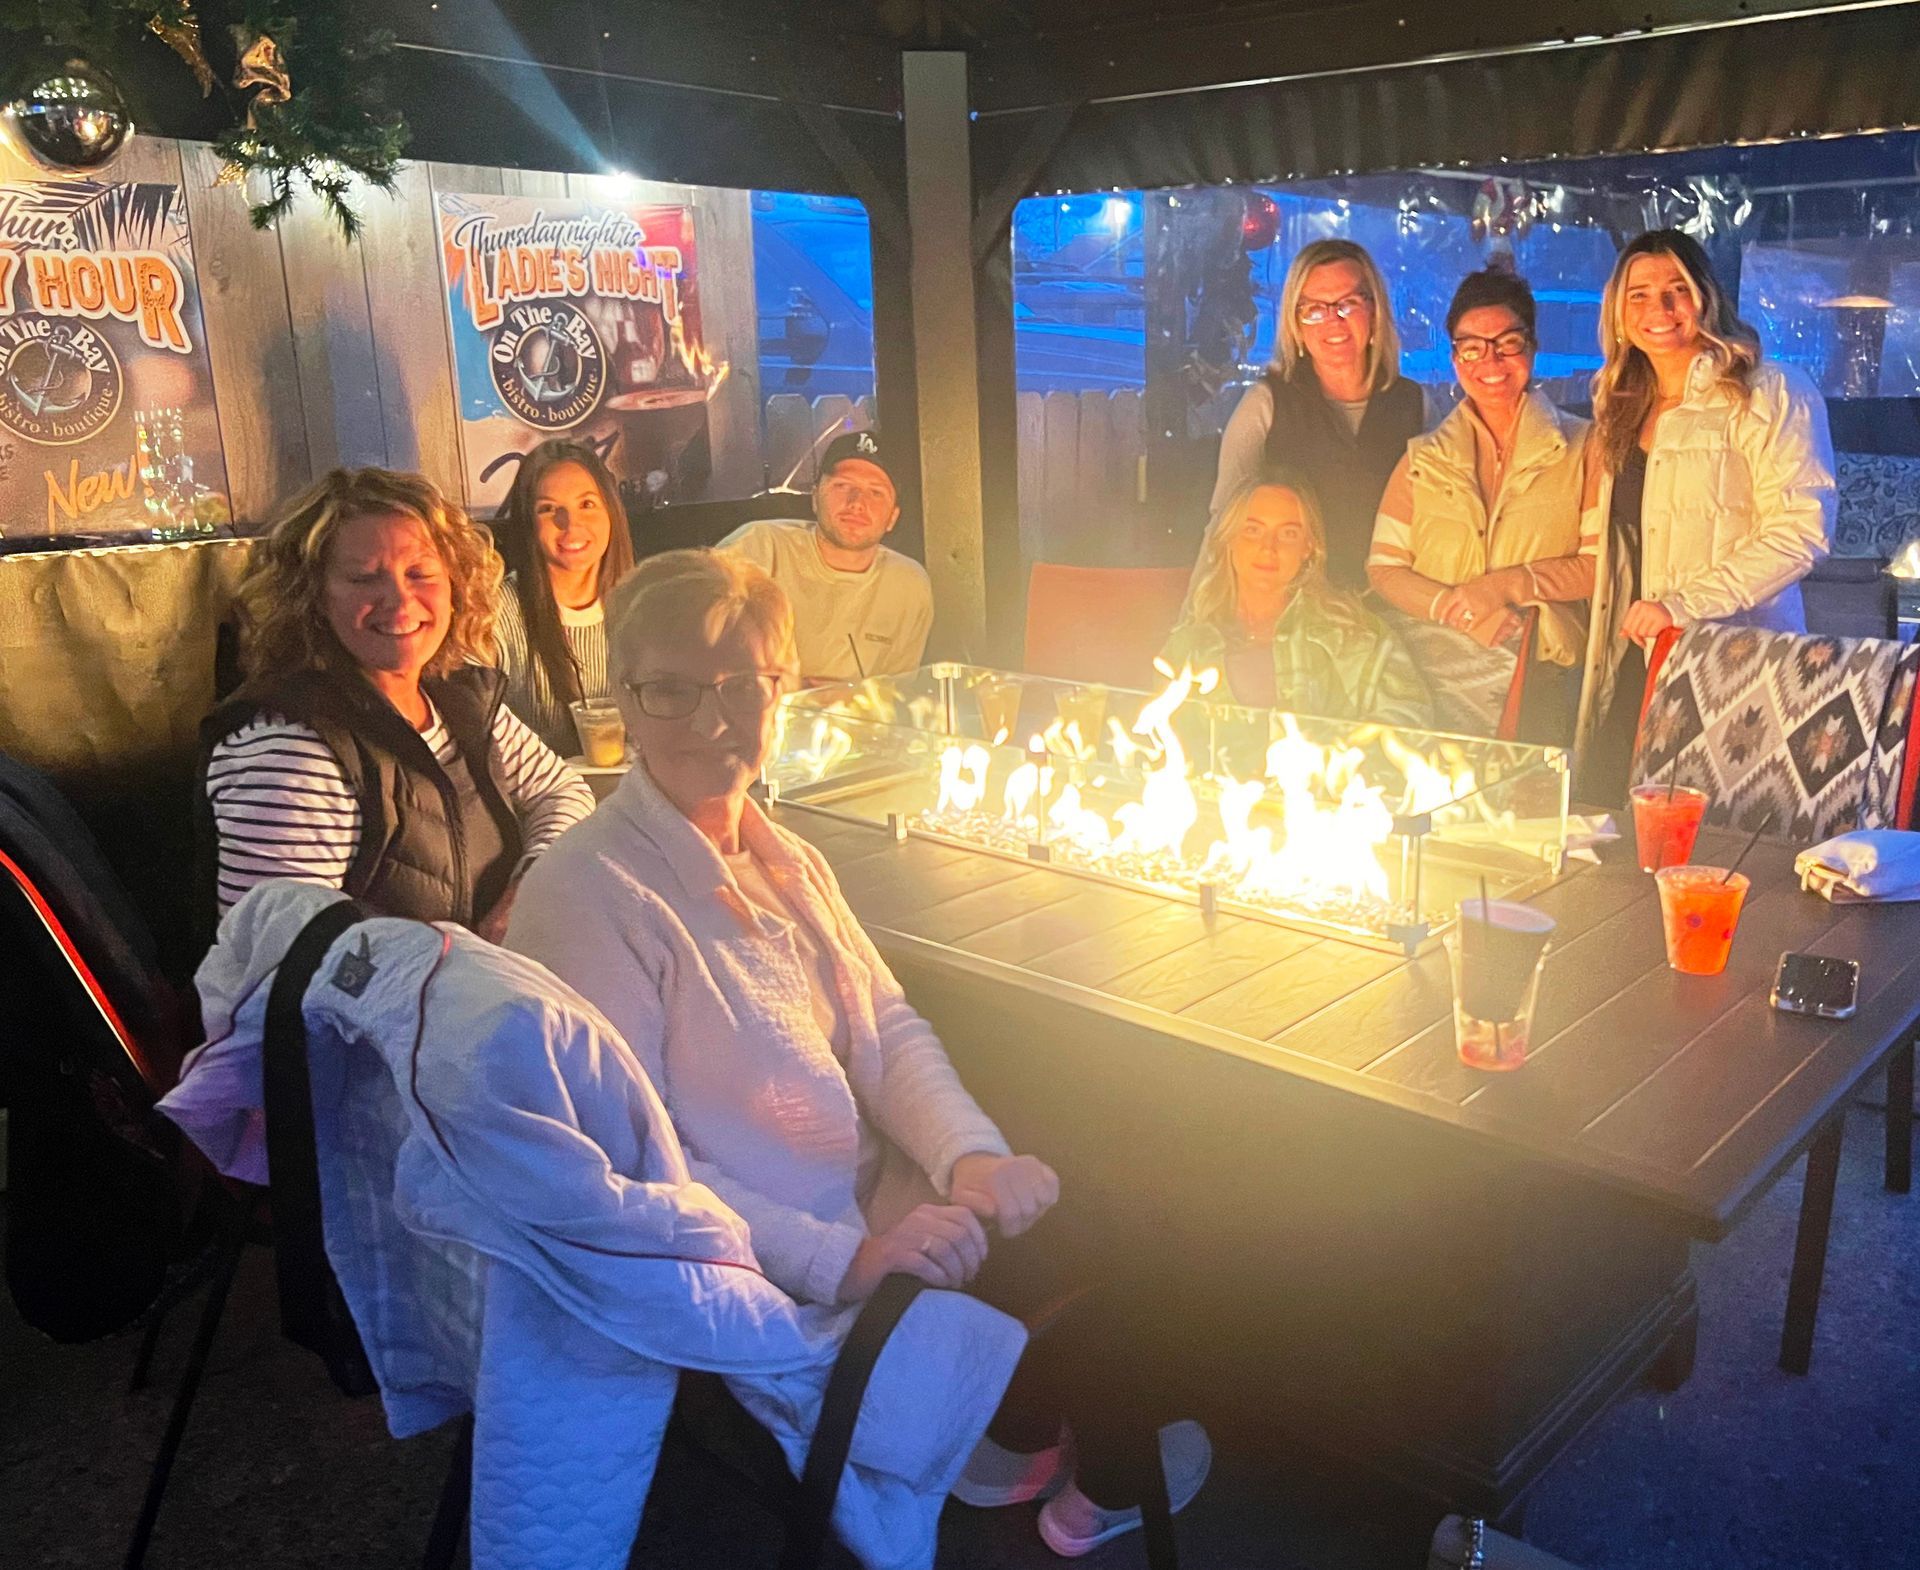 A group of people are sitting around a table with a fire pit in the background.